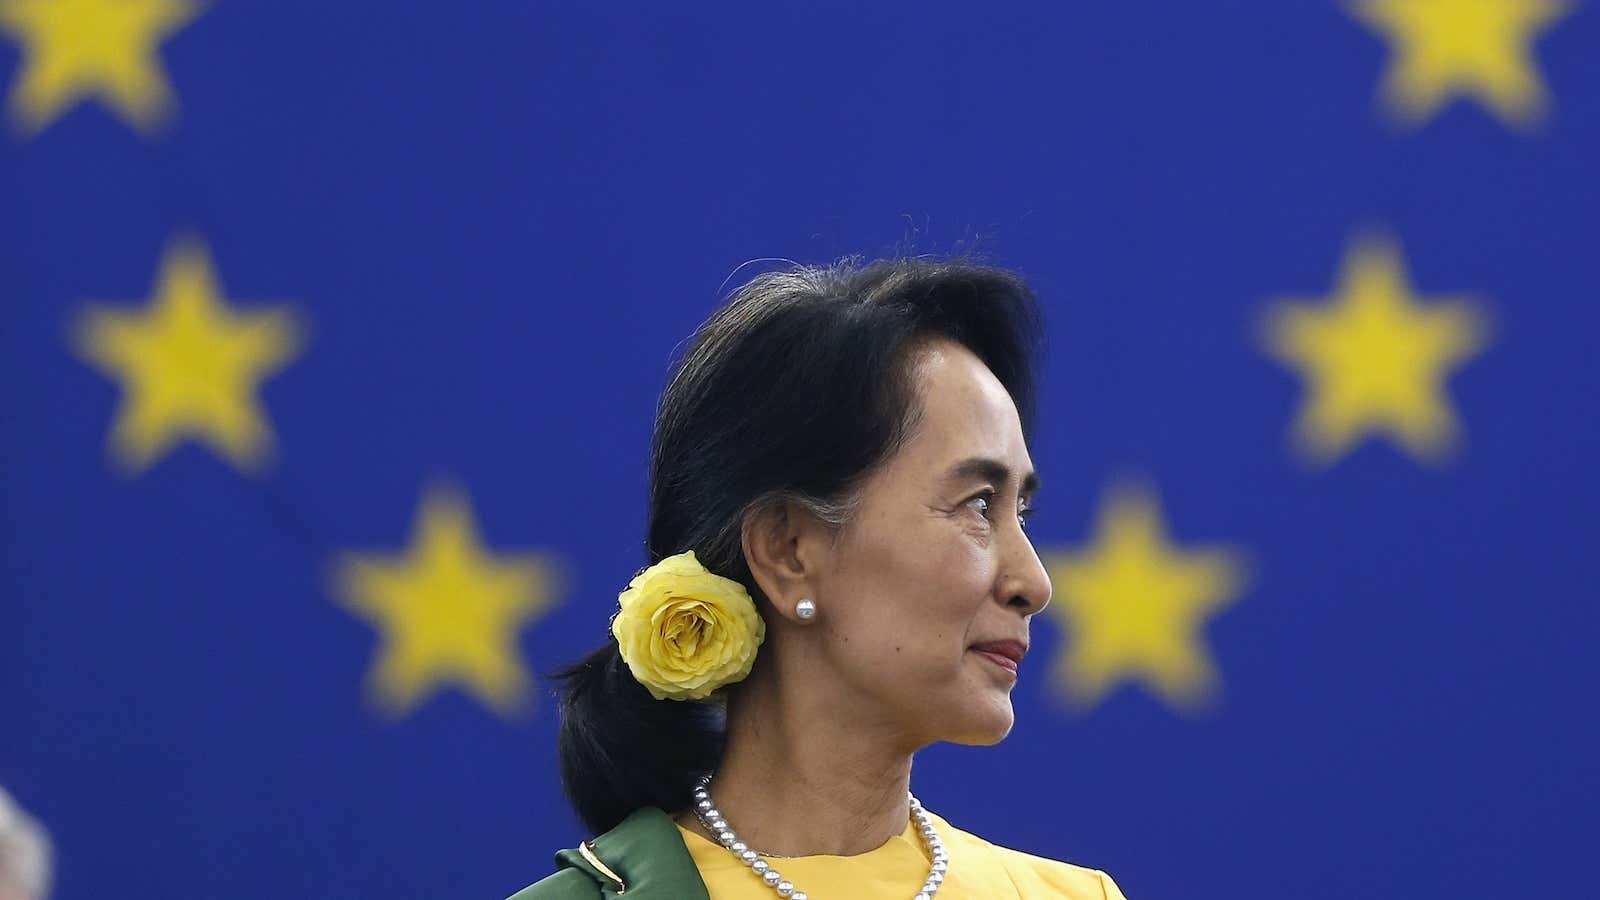 A provision in  Myanmar’s constitution keeps Aung San Suu Kyi from claiming the presidency, even if fairly elected.